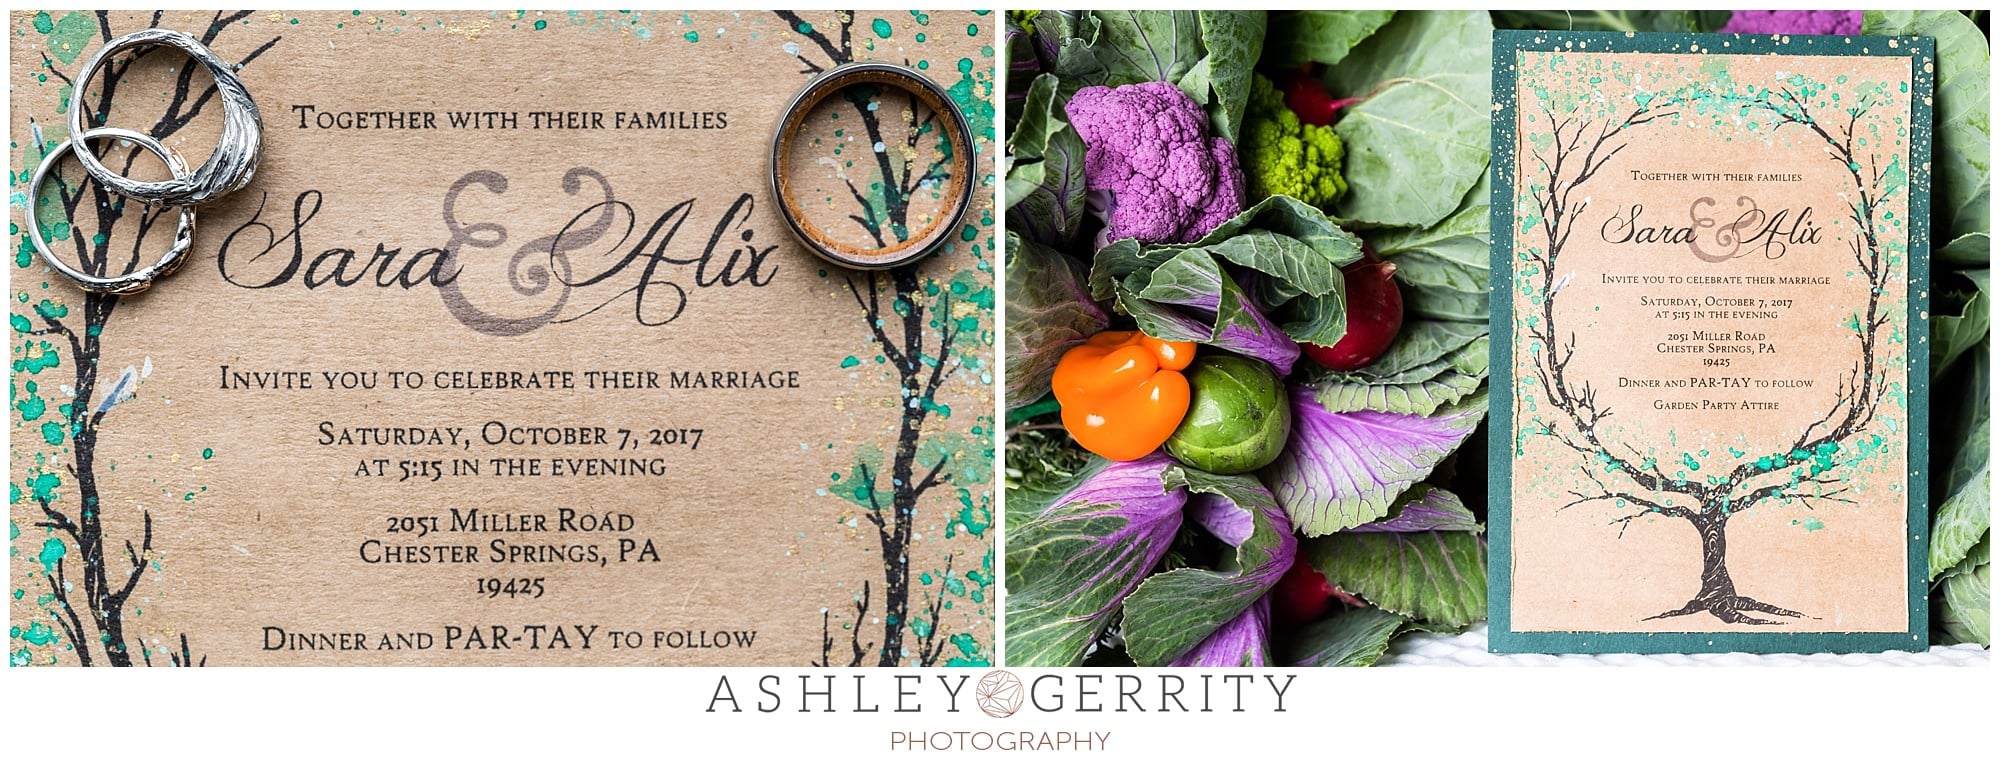 Tree of life wedding invitation from Etsy paired with vegetable bouquets of cabbage, peppers, & broccoli wrapped in fresh herbs from Wegmans